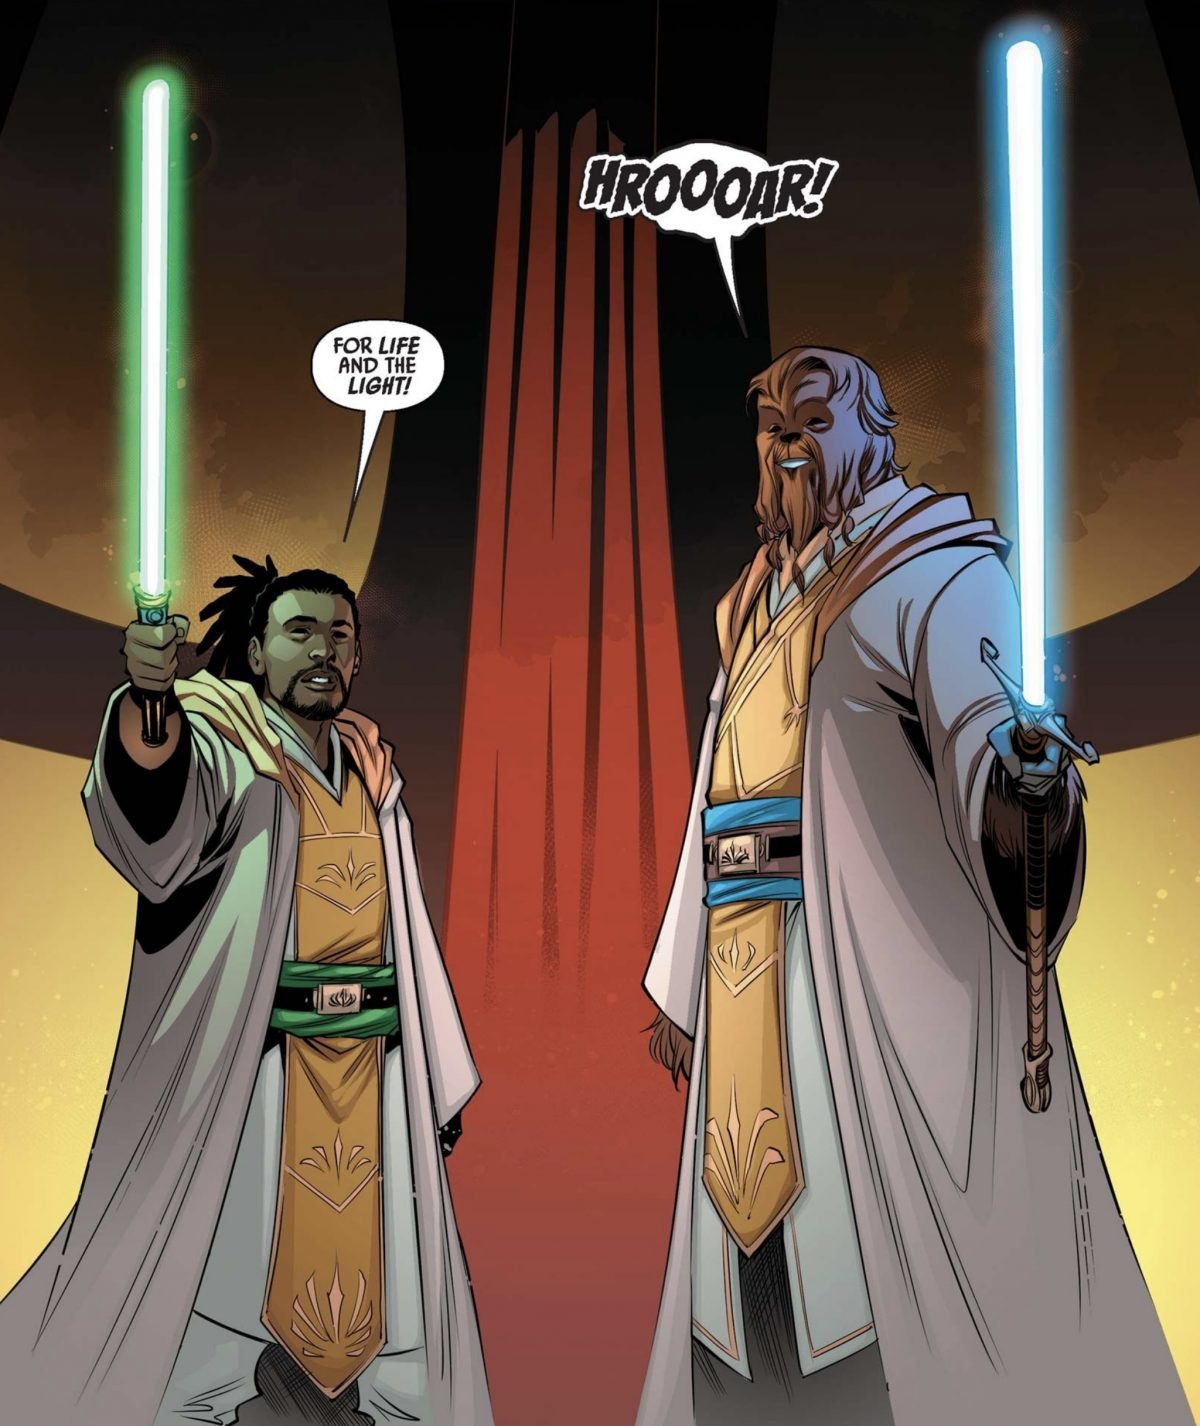 wookiee and another jedi stand together and wield their lightsabers